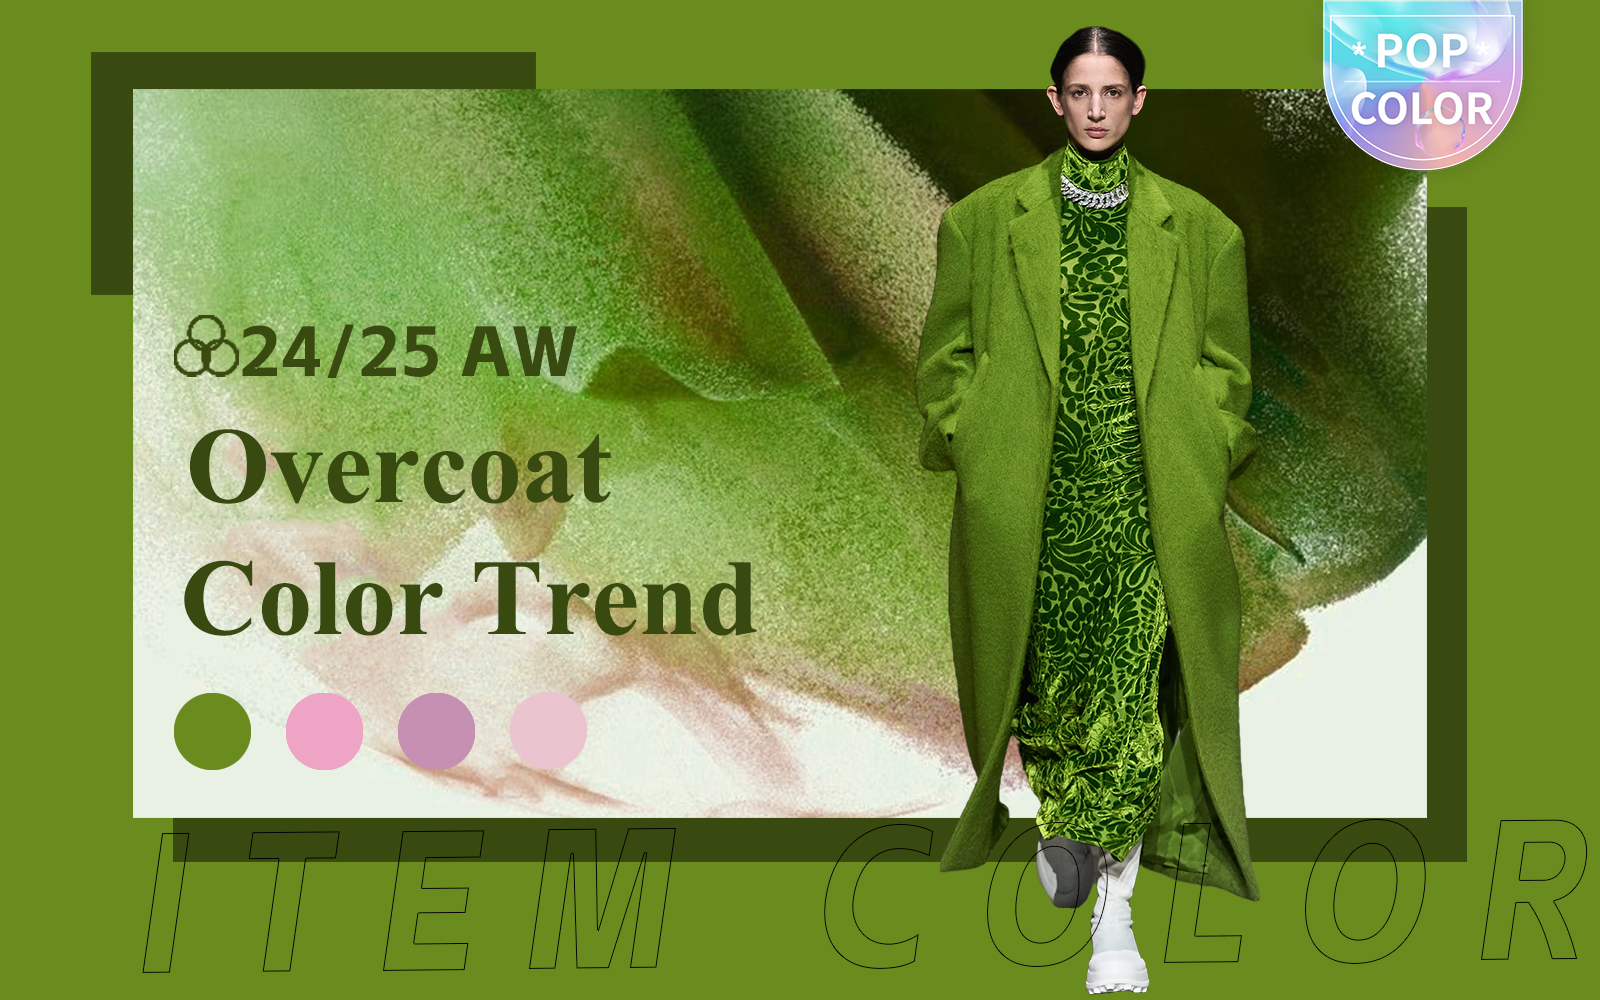 Natural Chic -- The Color Trend for Women's Overcoat